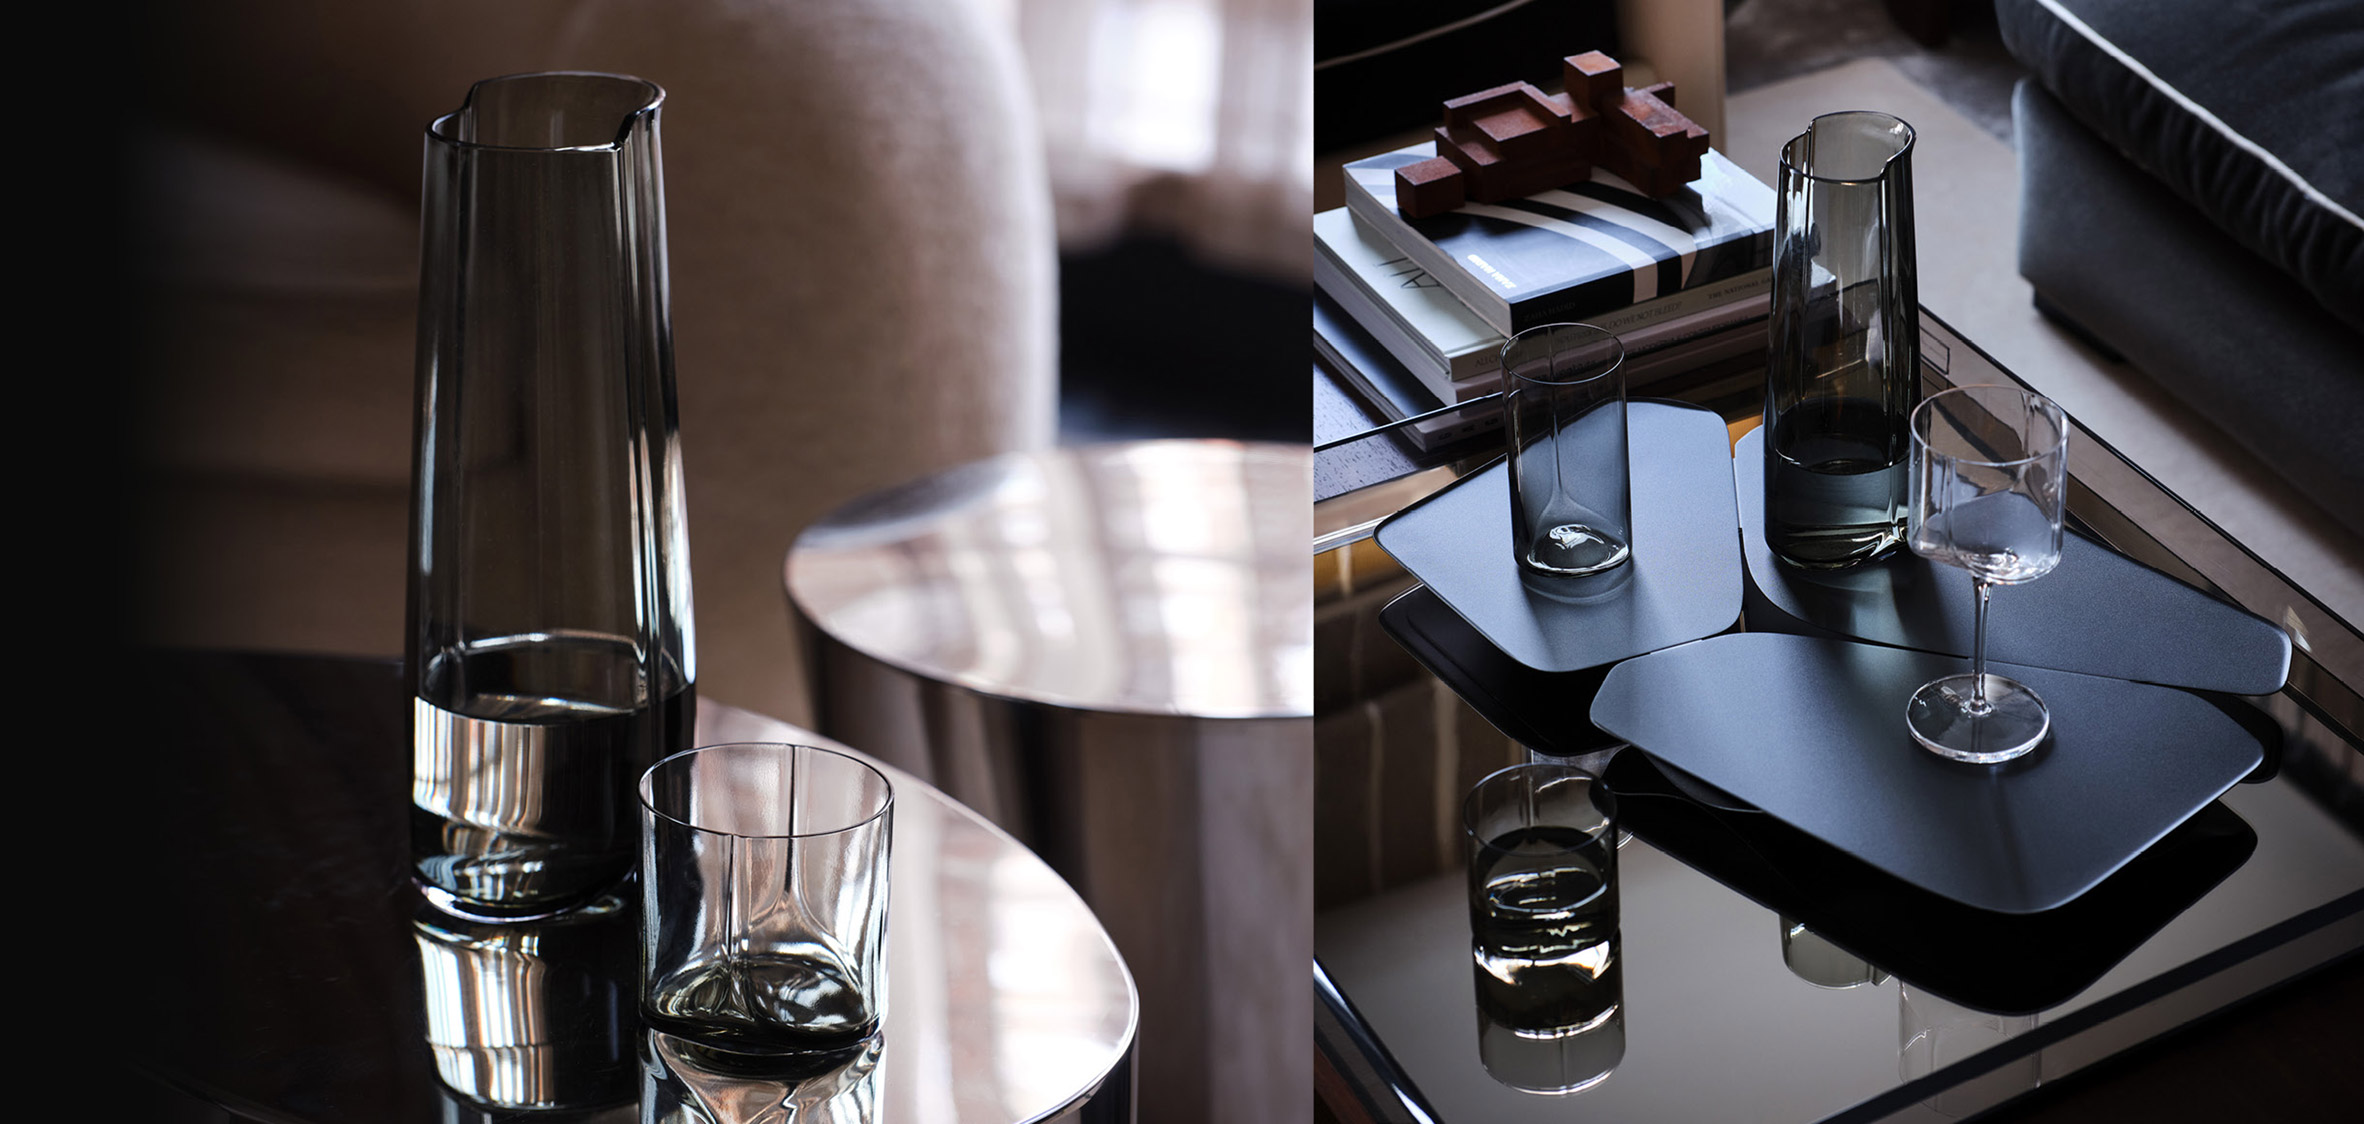 Photograph showing glassware on coffee table